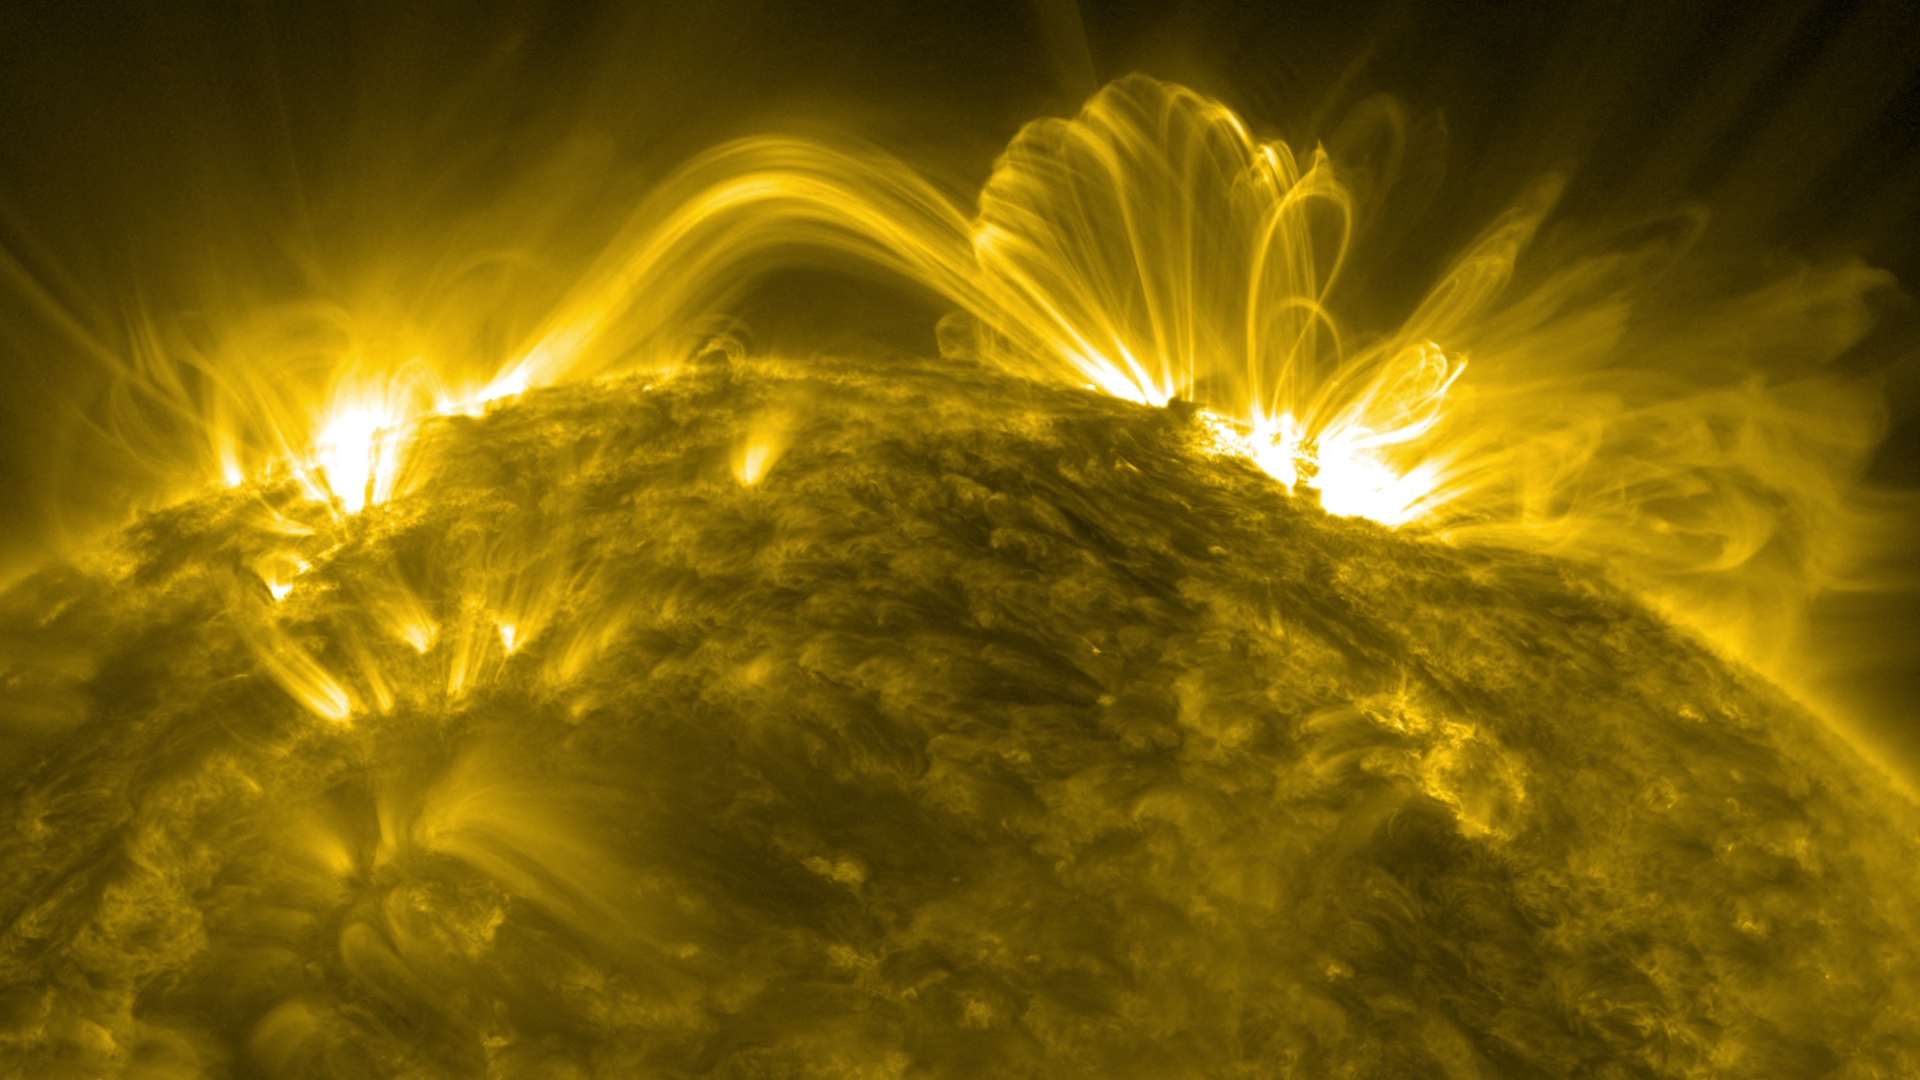 Coronal loops on a golden Sun, arching over the surface.